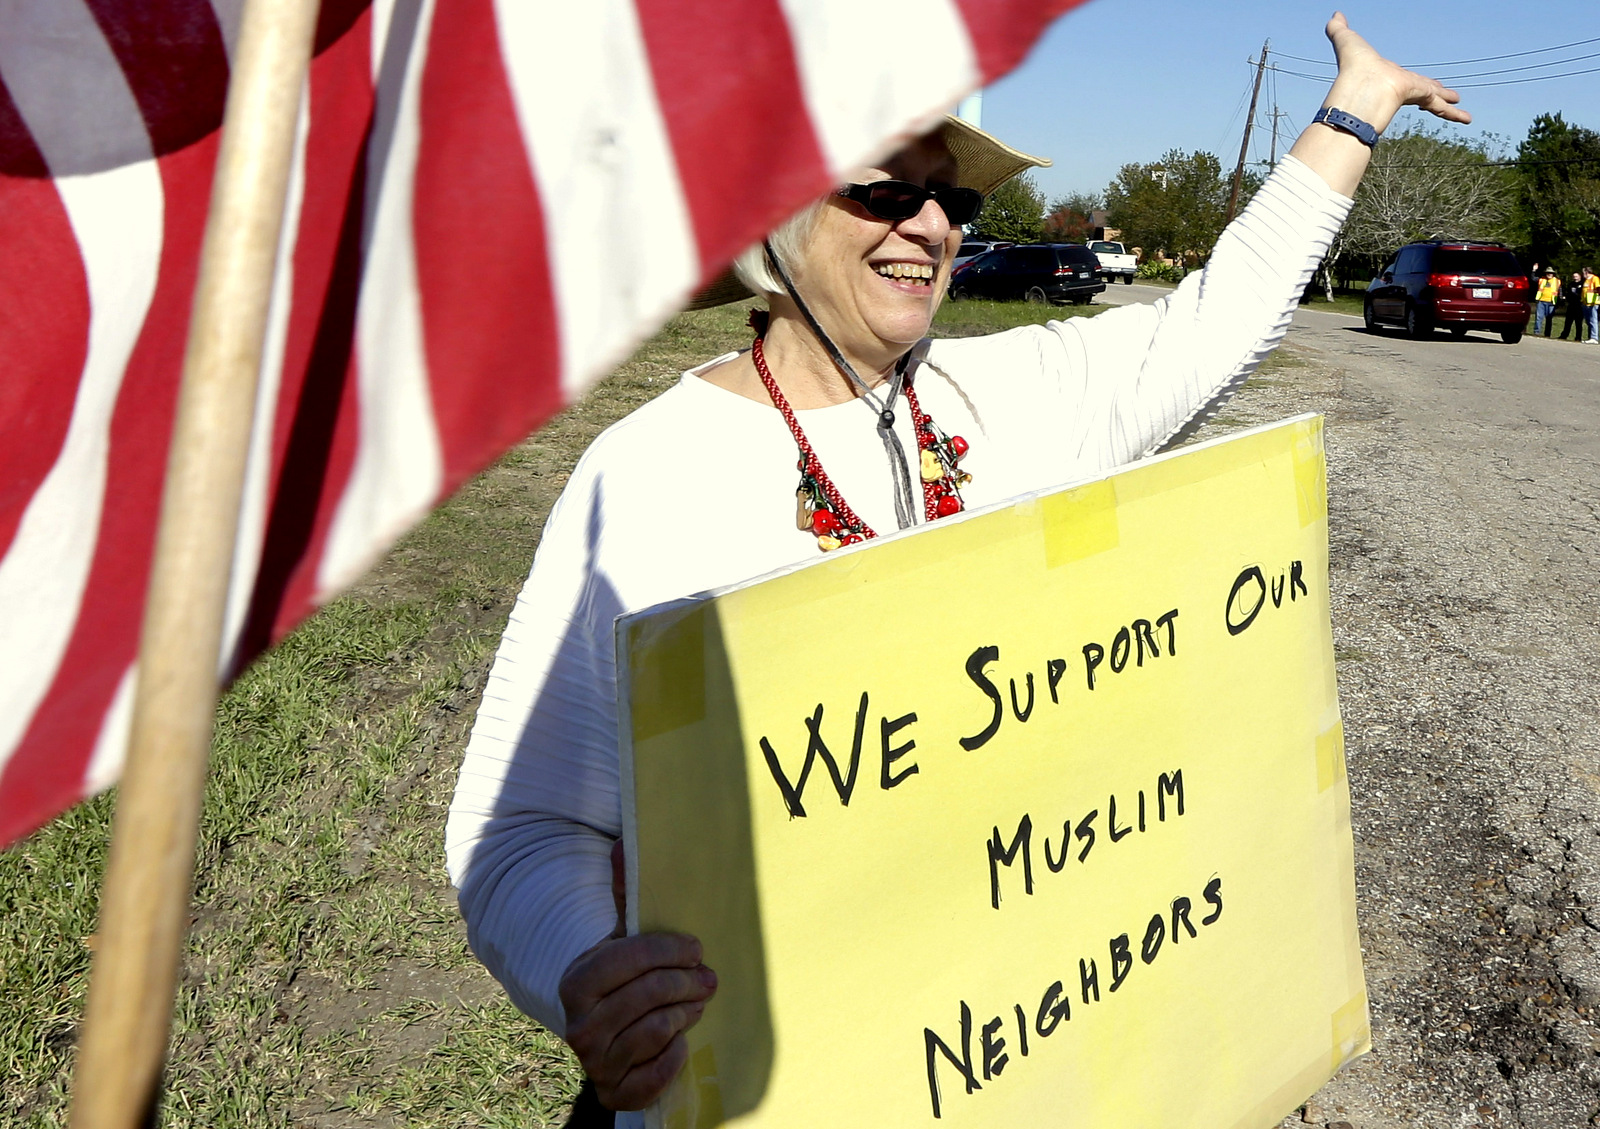 Jane Malin holds a sign as she waves to passing cars during a rally to show support for Muslim members of the community. (AP Photo/David J. Phillip)